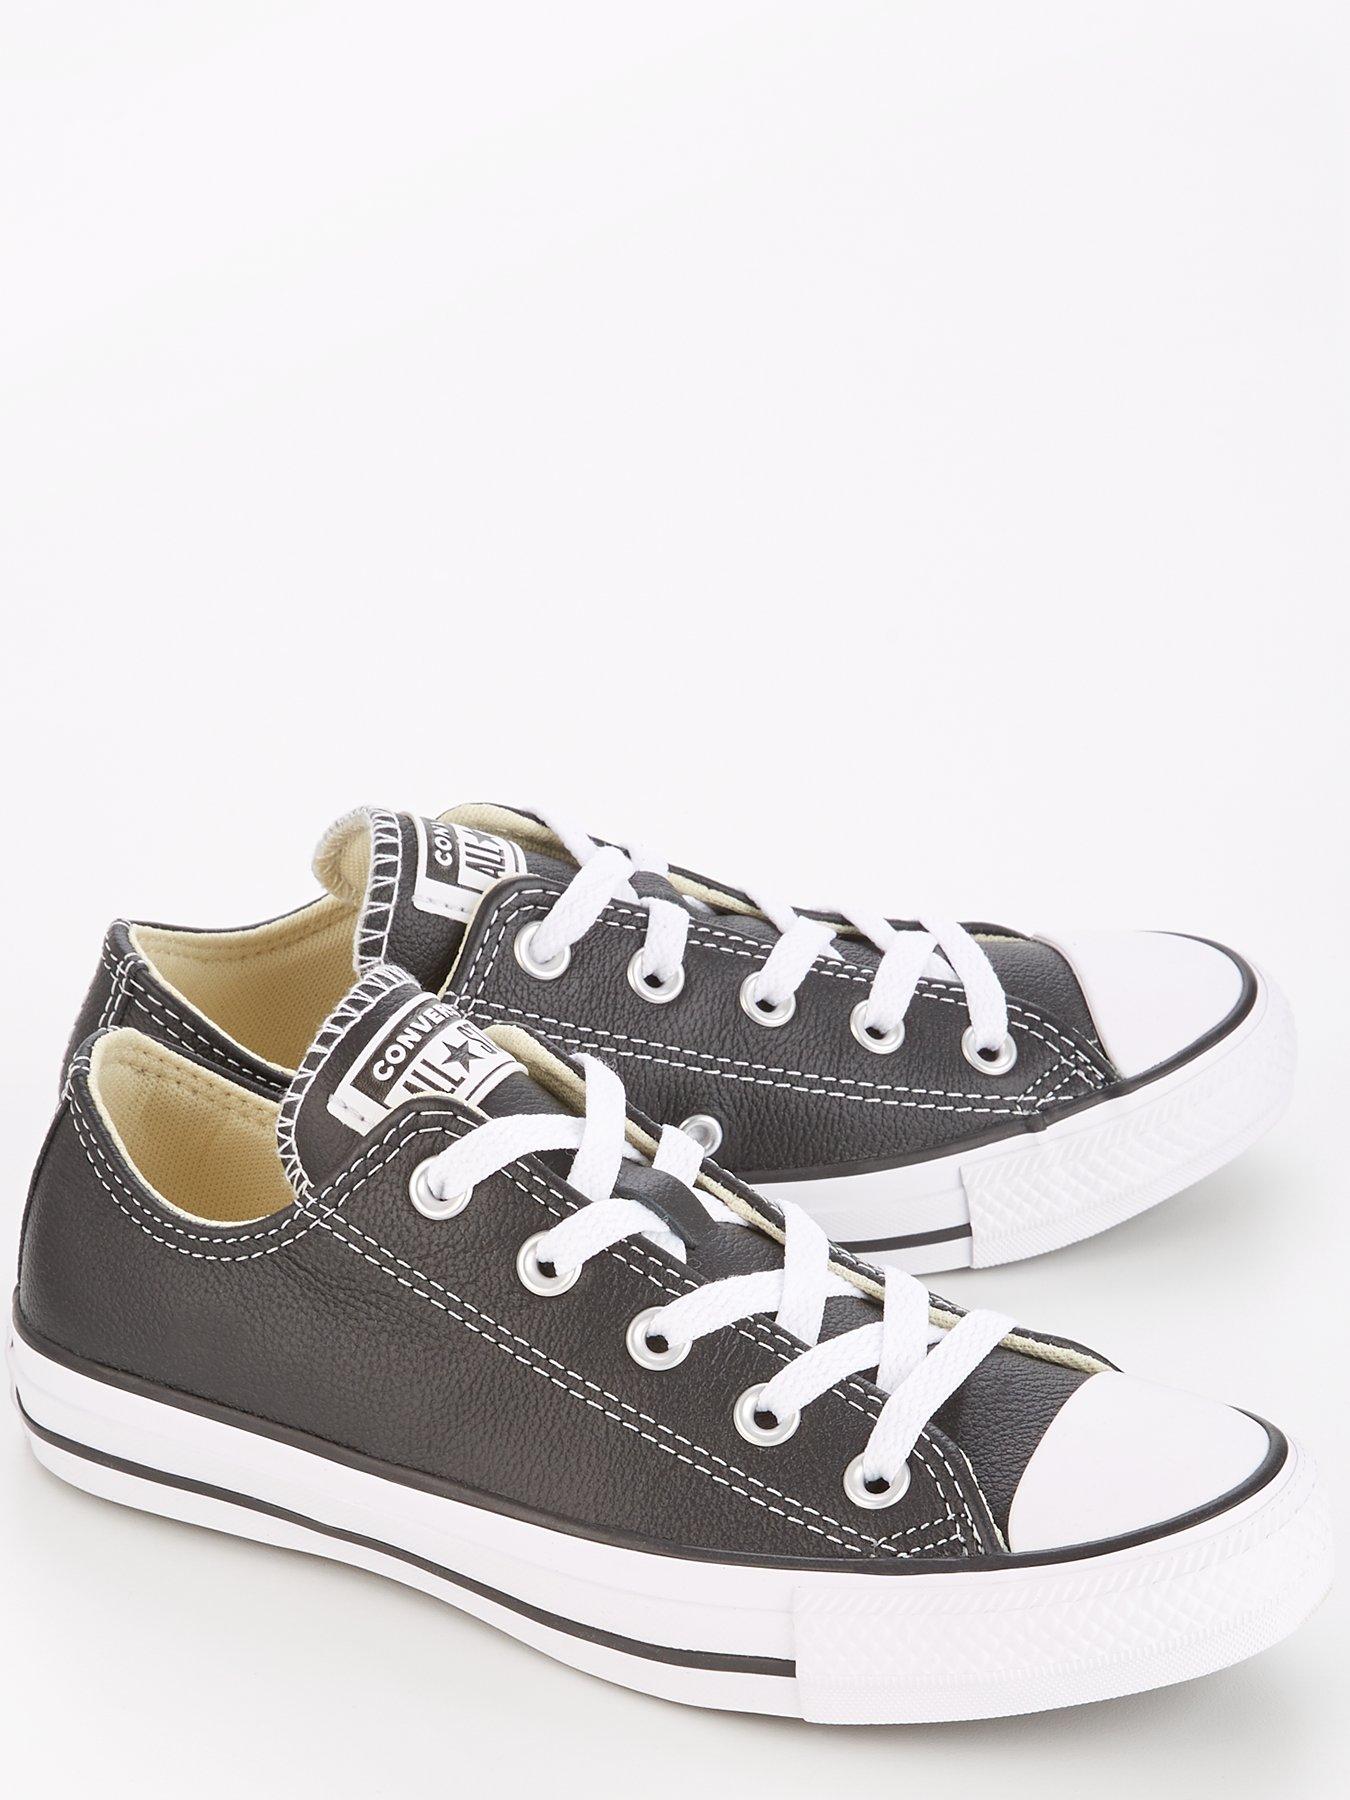 Converse Chuck Taylor All Star Leather Ox - Black white | very.co.uk